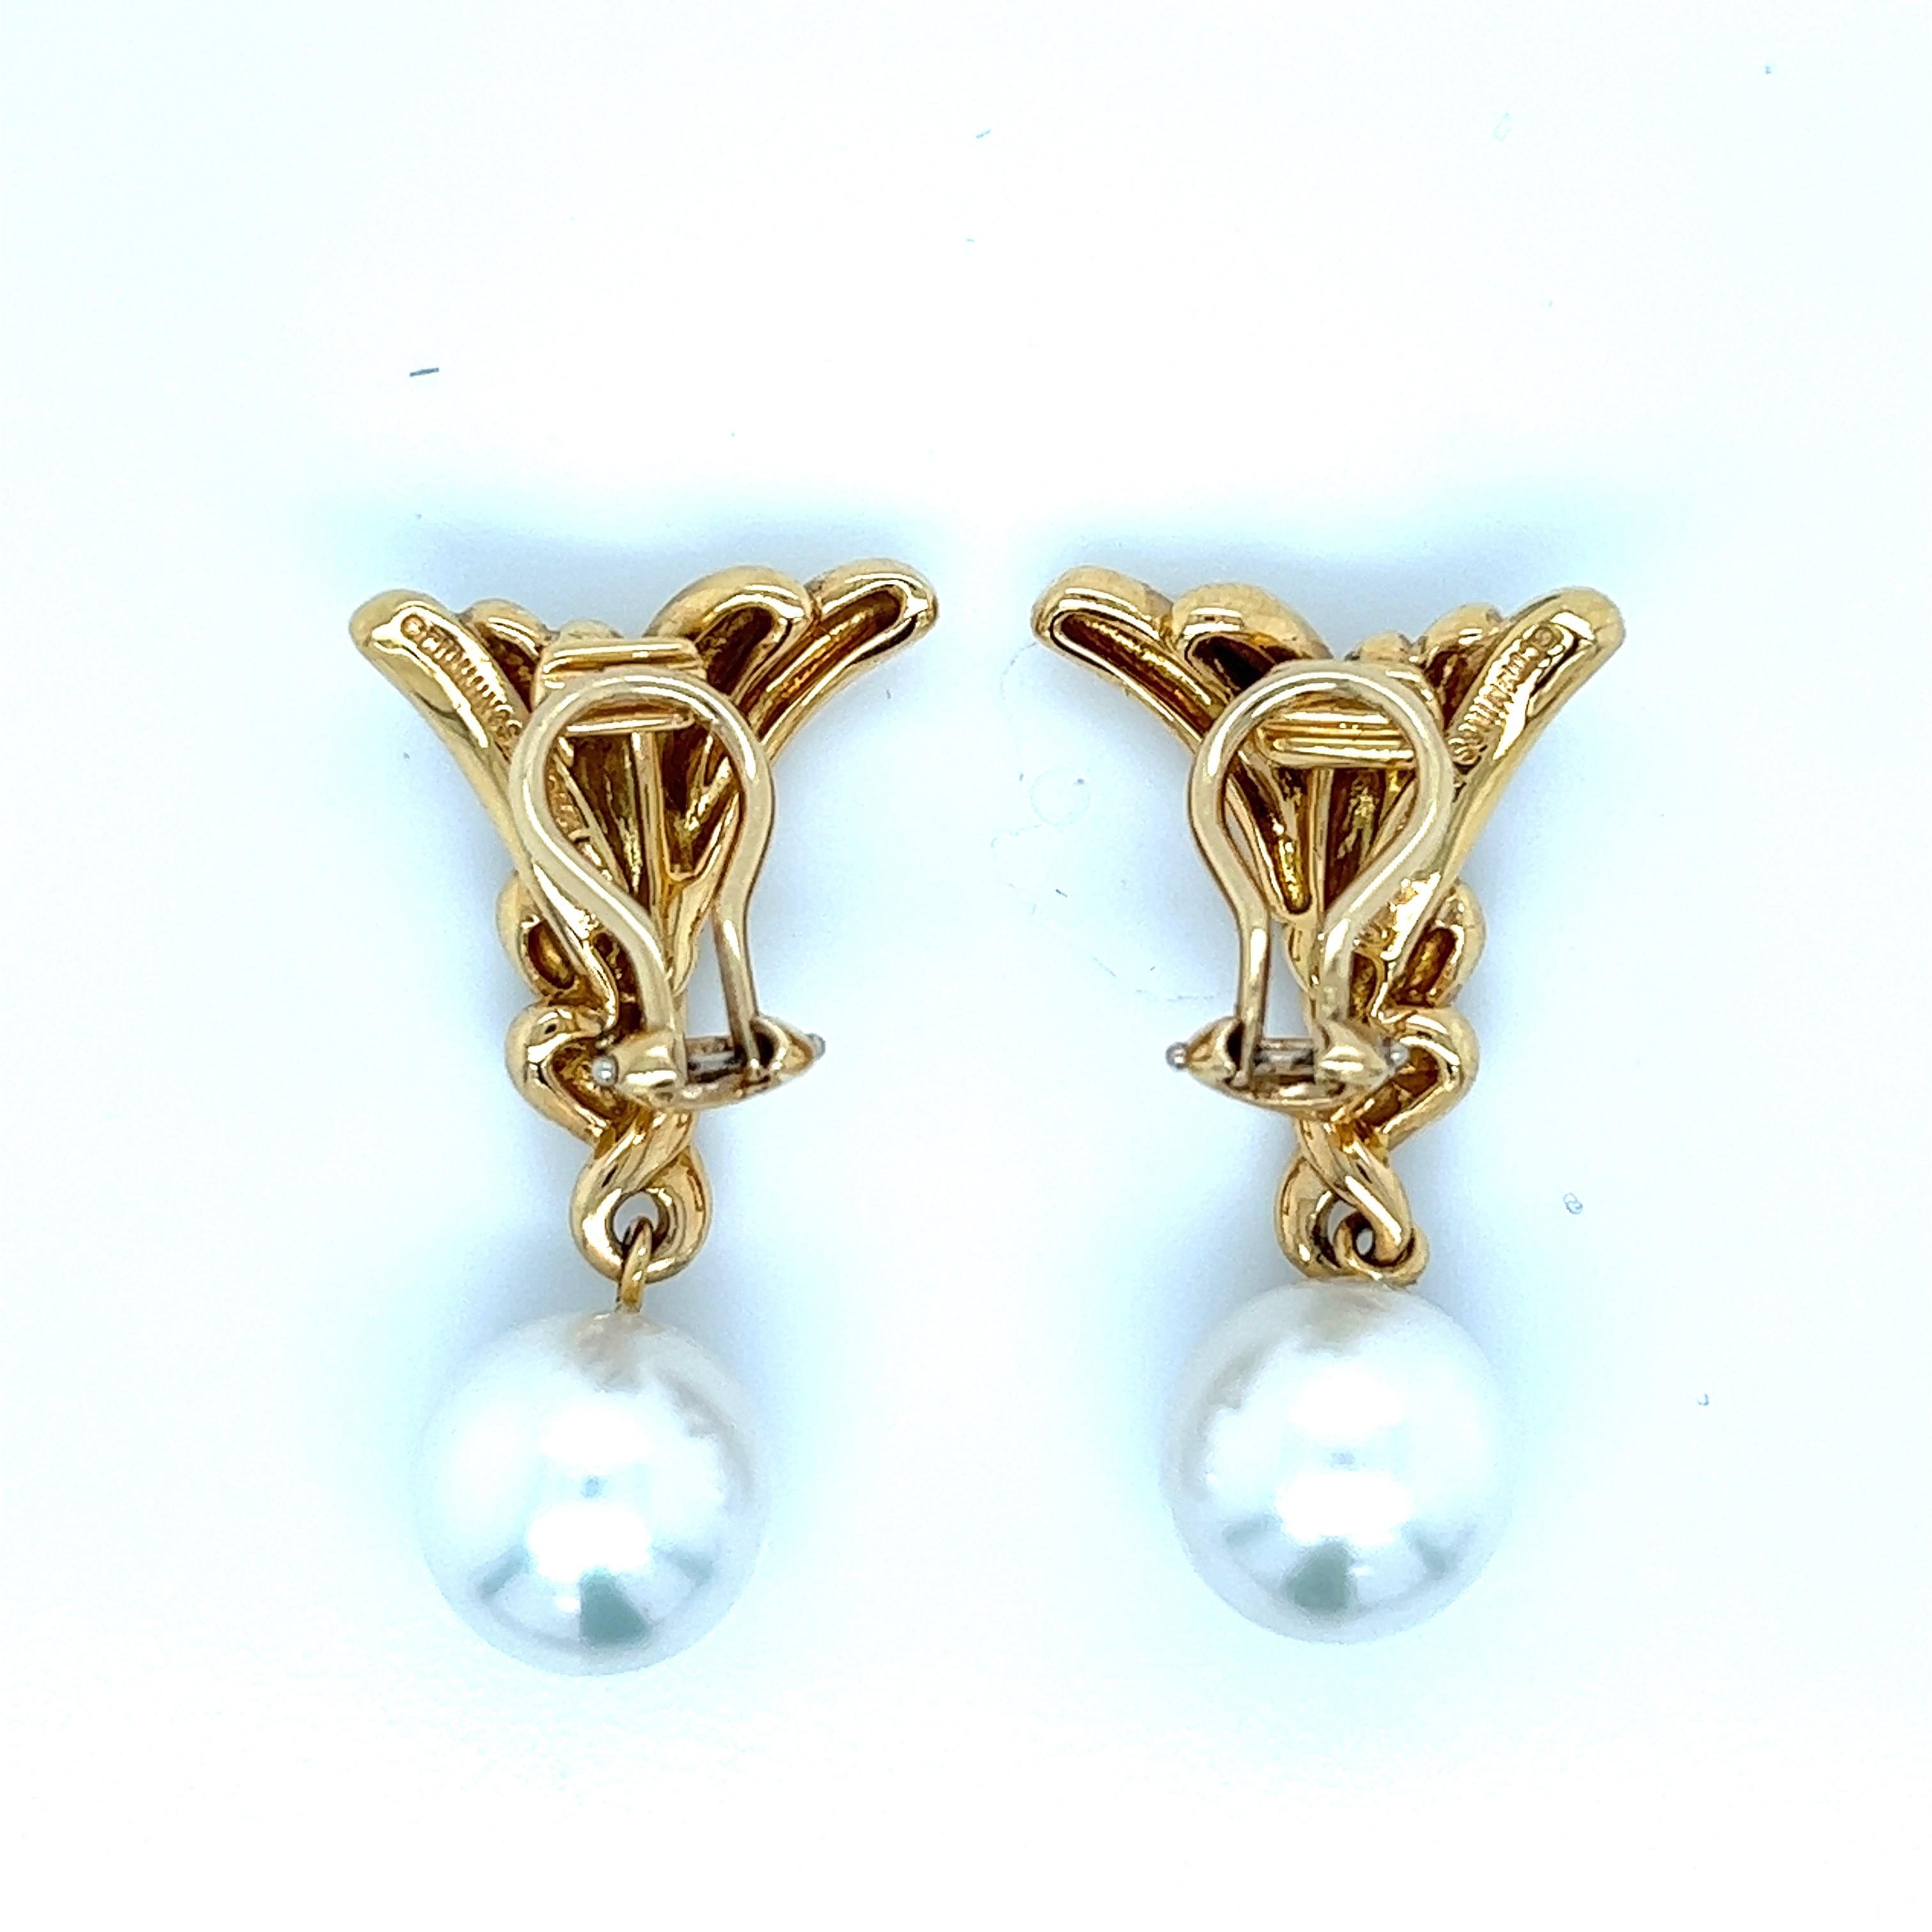 Angela Cummings for Assael 18 karat yellow gold ear clips with dangling pearls. The pearl's diameter is 1.2 cm. Marked: Cummings / Assael / 750. Total weight: 21.1 grams. Width: 2 cm. Length: 3.8 cm. 